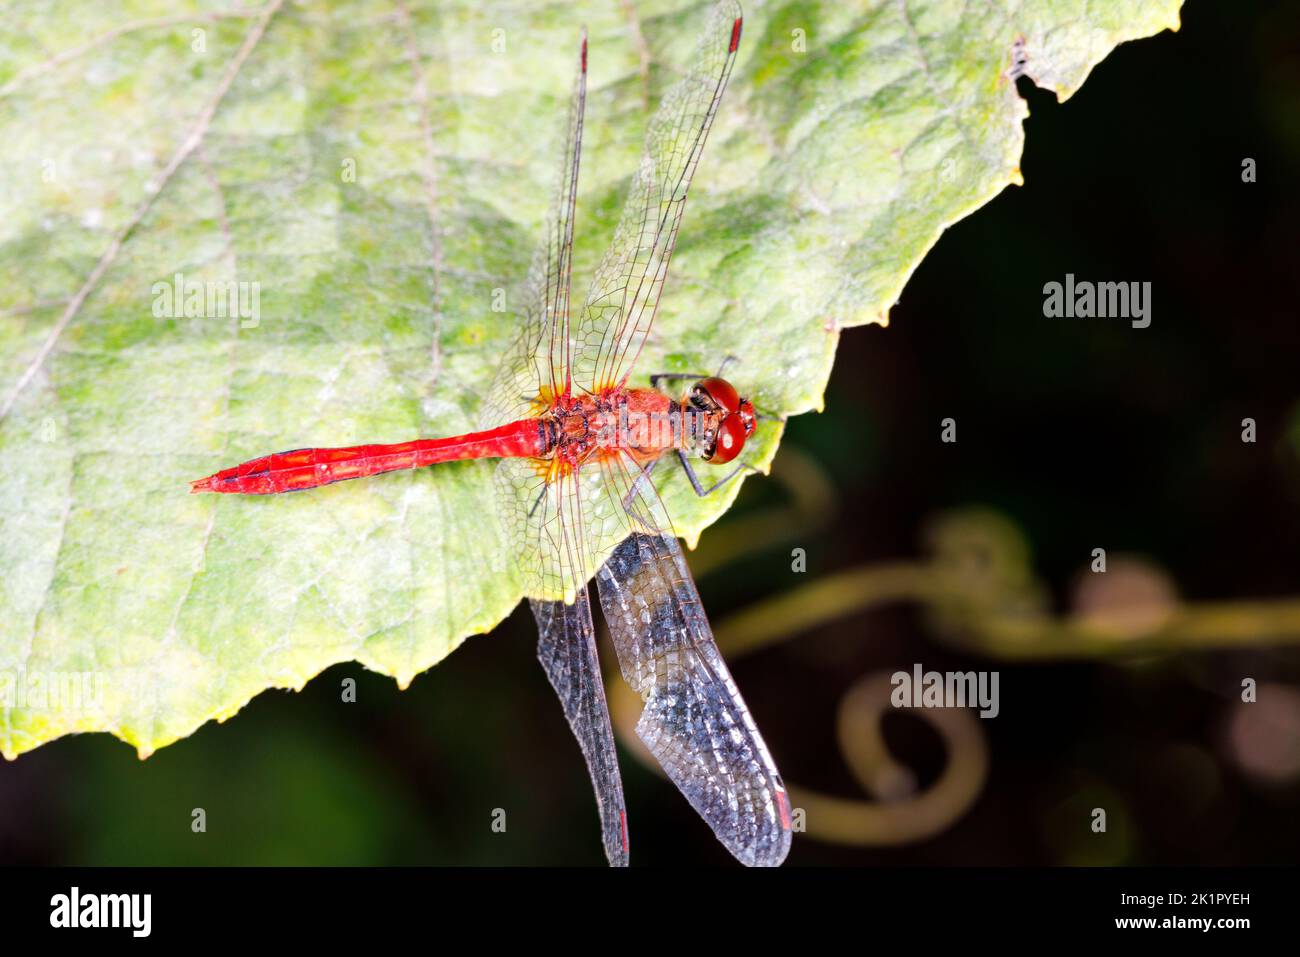 Red dragonfly with spread transparent wings on green blurred leaves in the wild. Close-up, from above, copy space. Stock Photo